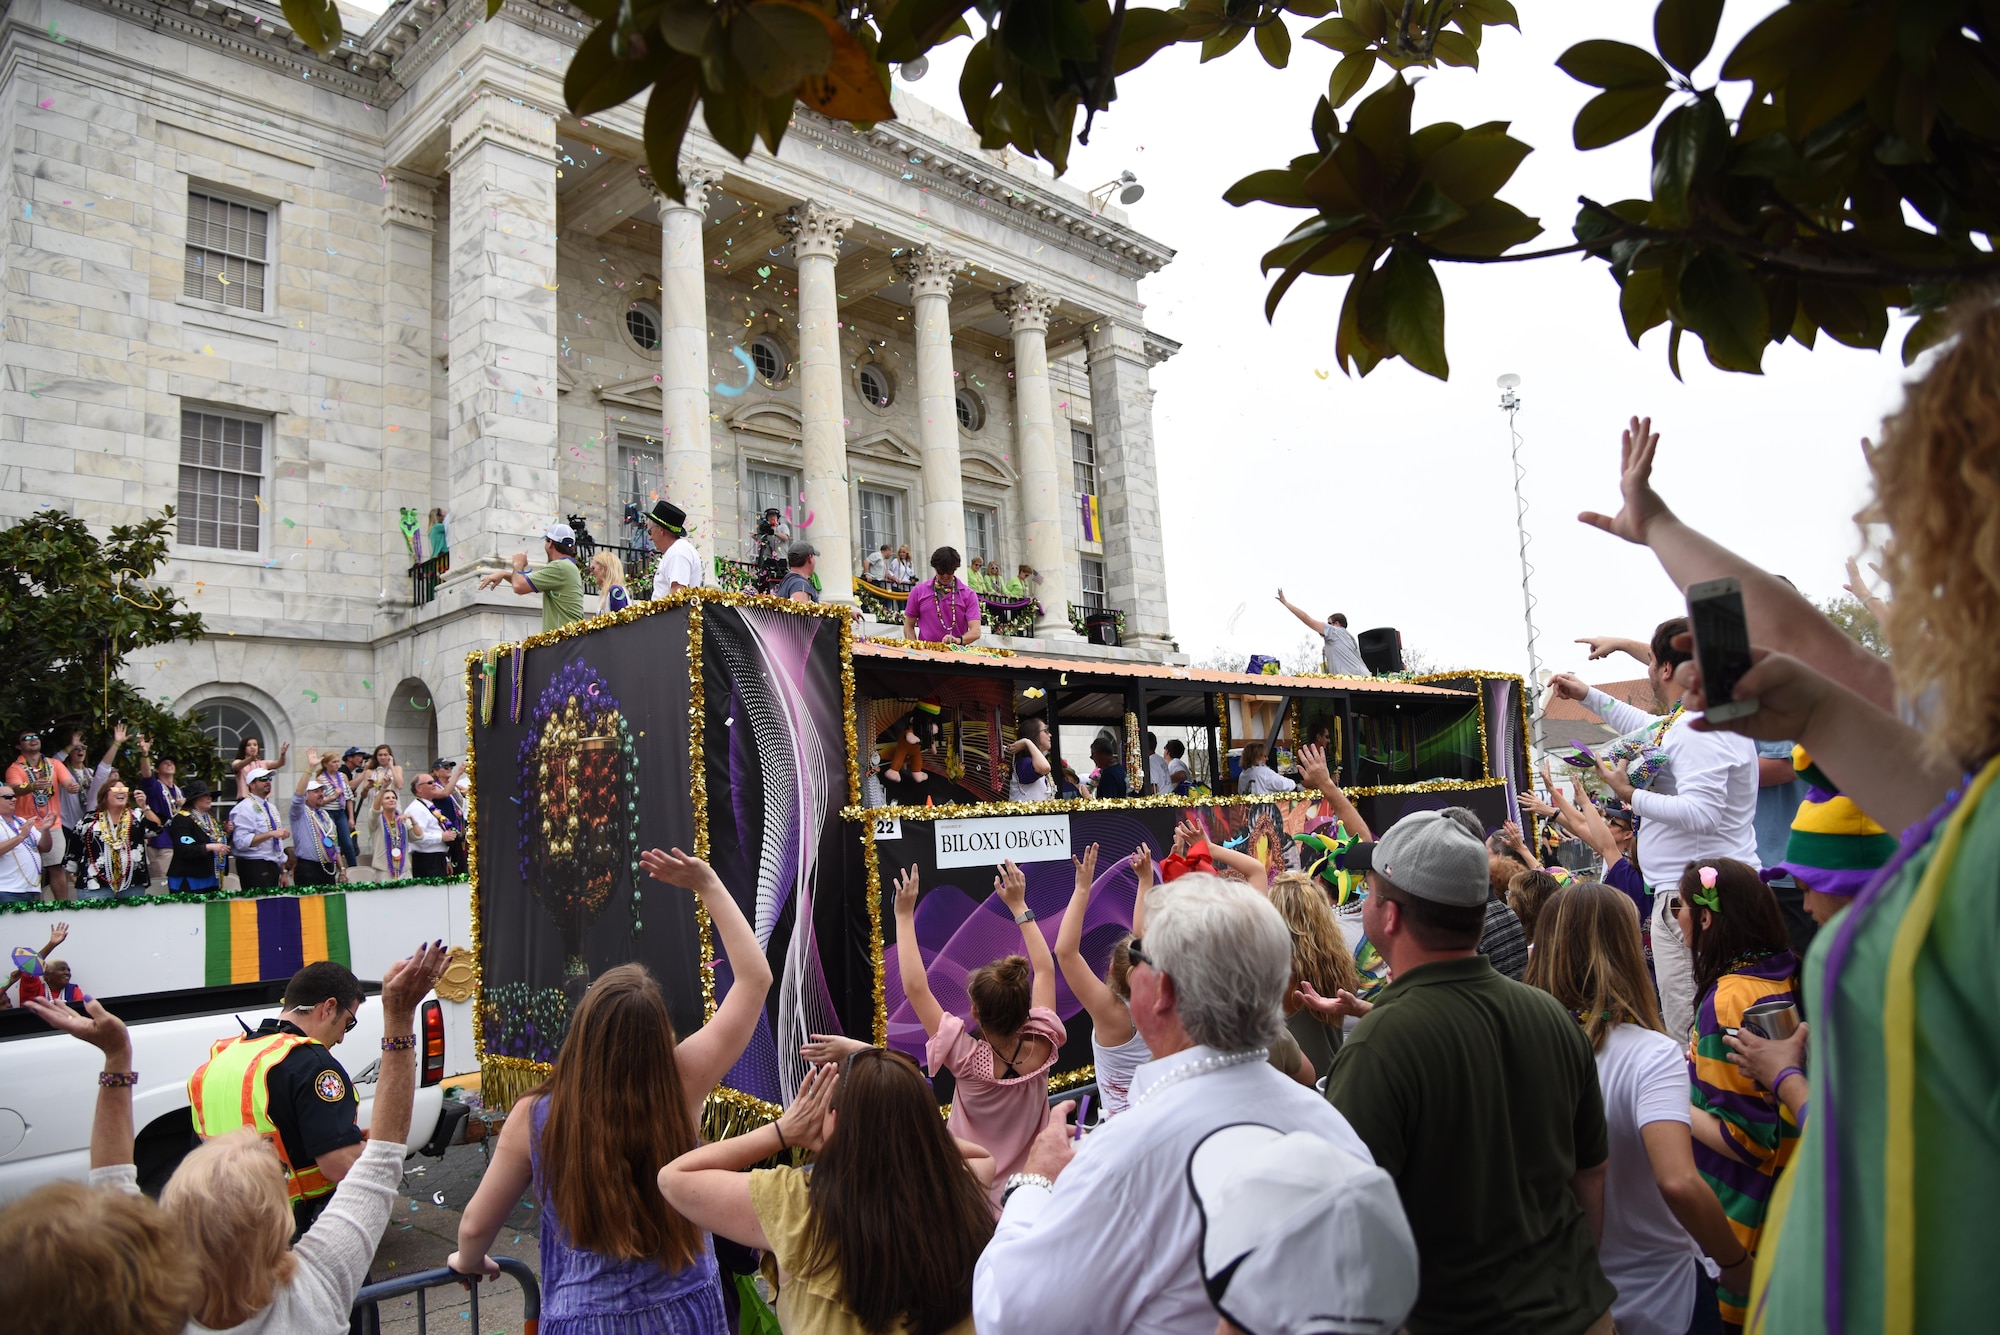 A float passes in front of Biloxi City Hall during the Gulf Coast Carnival Association Mardi Gras parade Feb. 28, 2017, in Biloxi, Miss. Every Mardi Gras season, Keesler personnel participate in local parades to show their support of the communities surrounding the installation. (U.S. Air Force photo by Kemberly Groue)